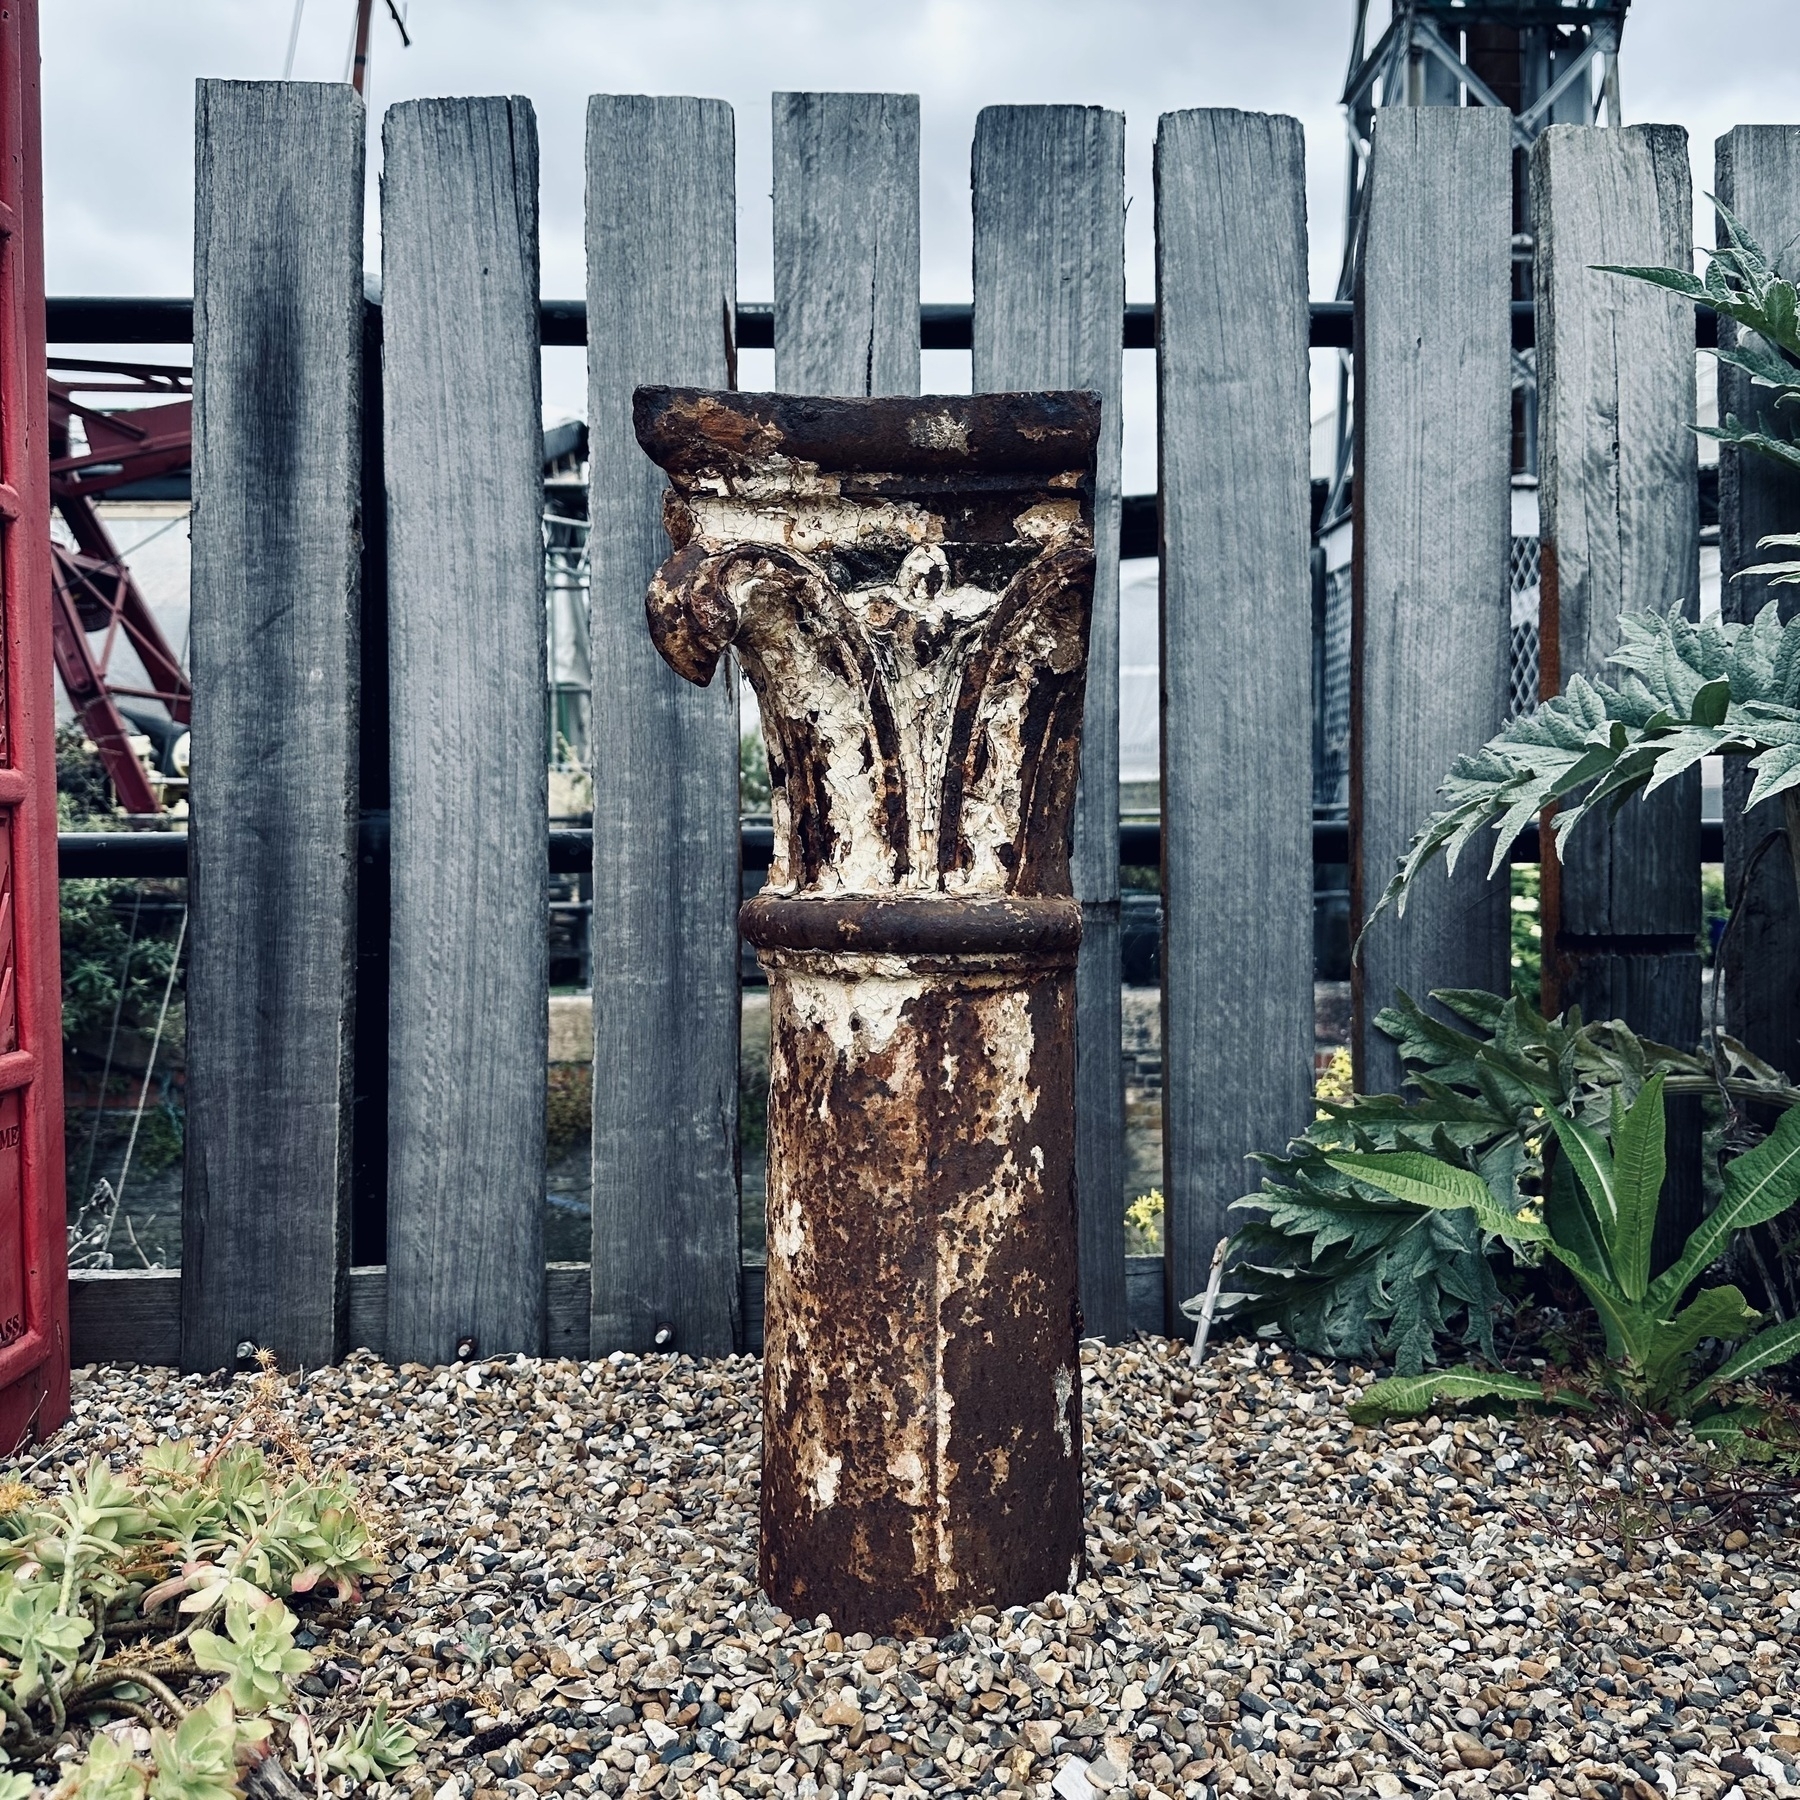 The top of a rusted metal Corinthian column, embedded in gravel, with a wooden fence behind.